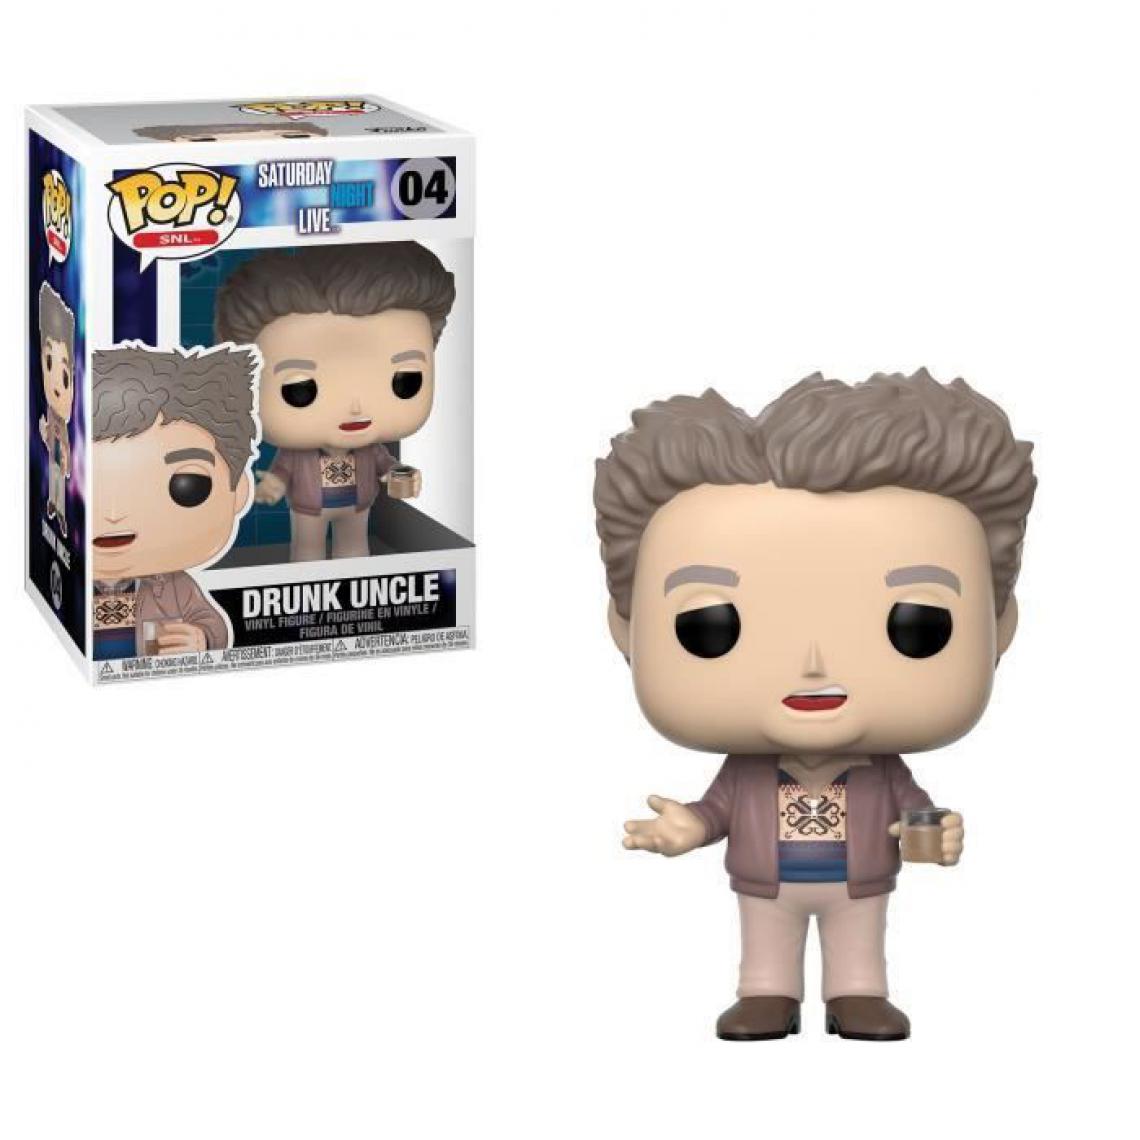 Funko - Figurine Funko Pop! SNL : Drunk Uncle Oncle saoul - Mangas